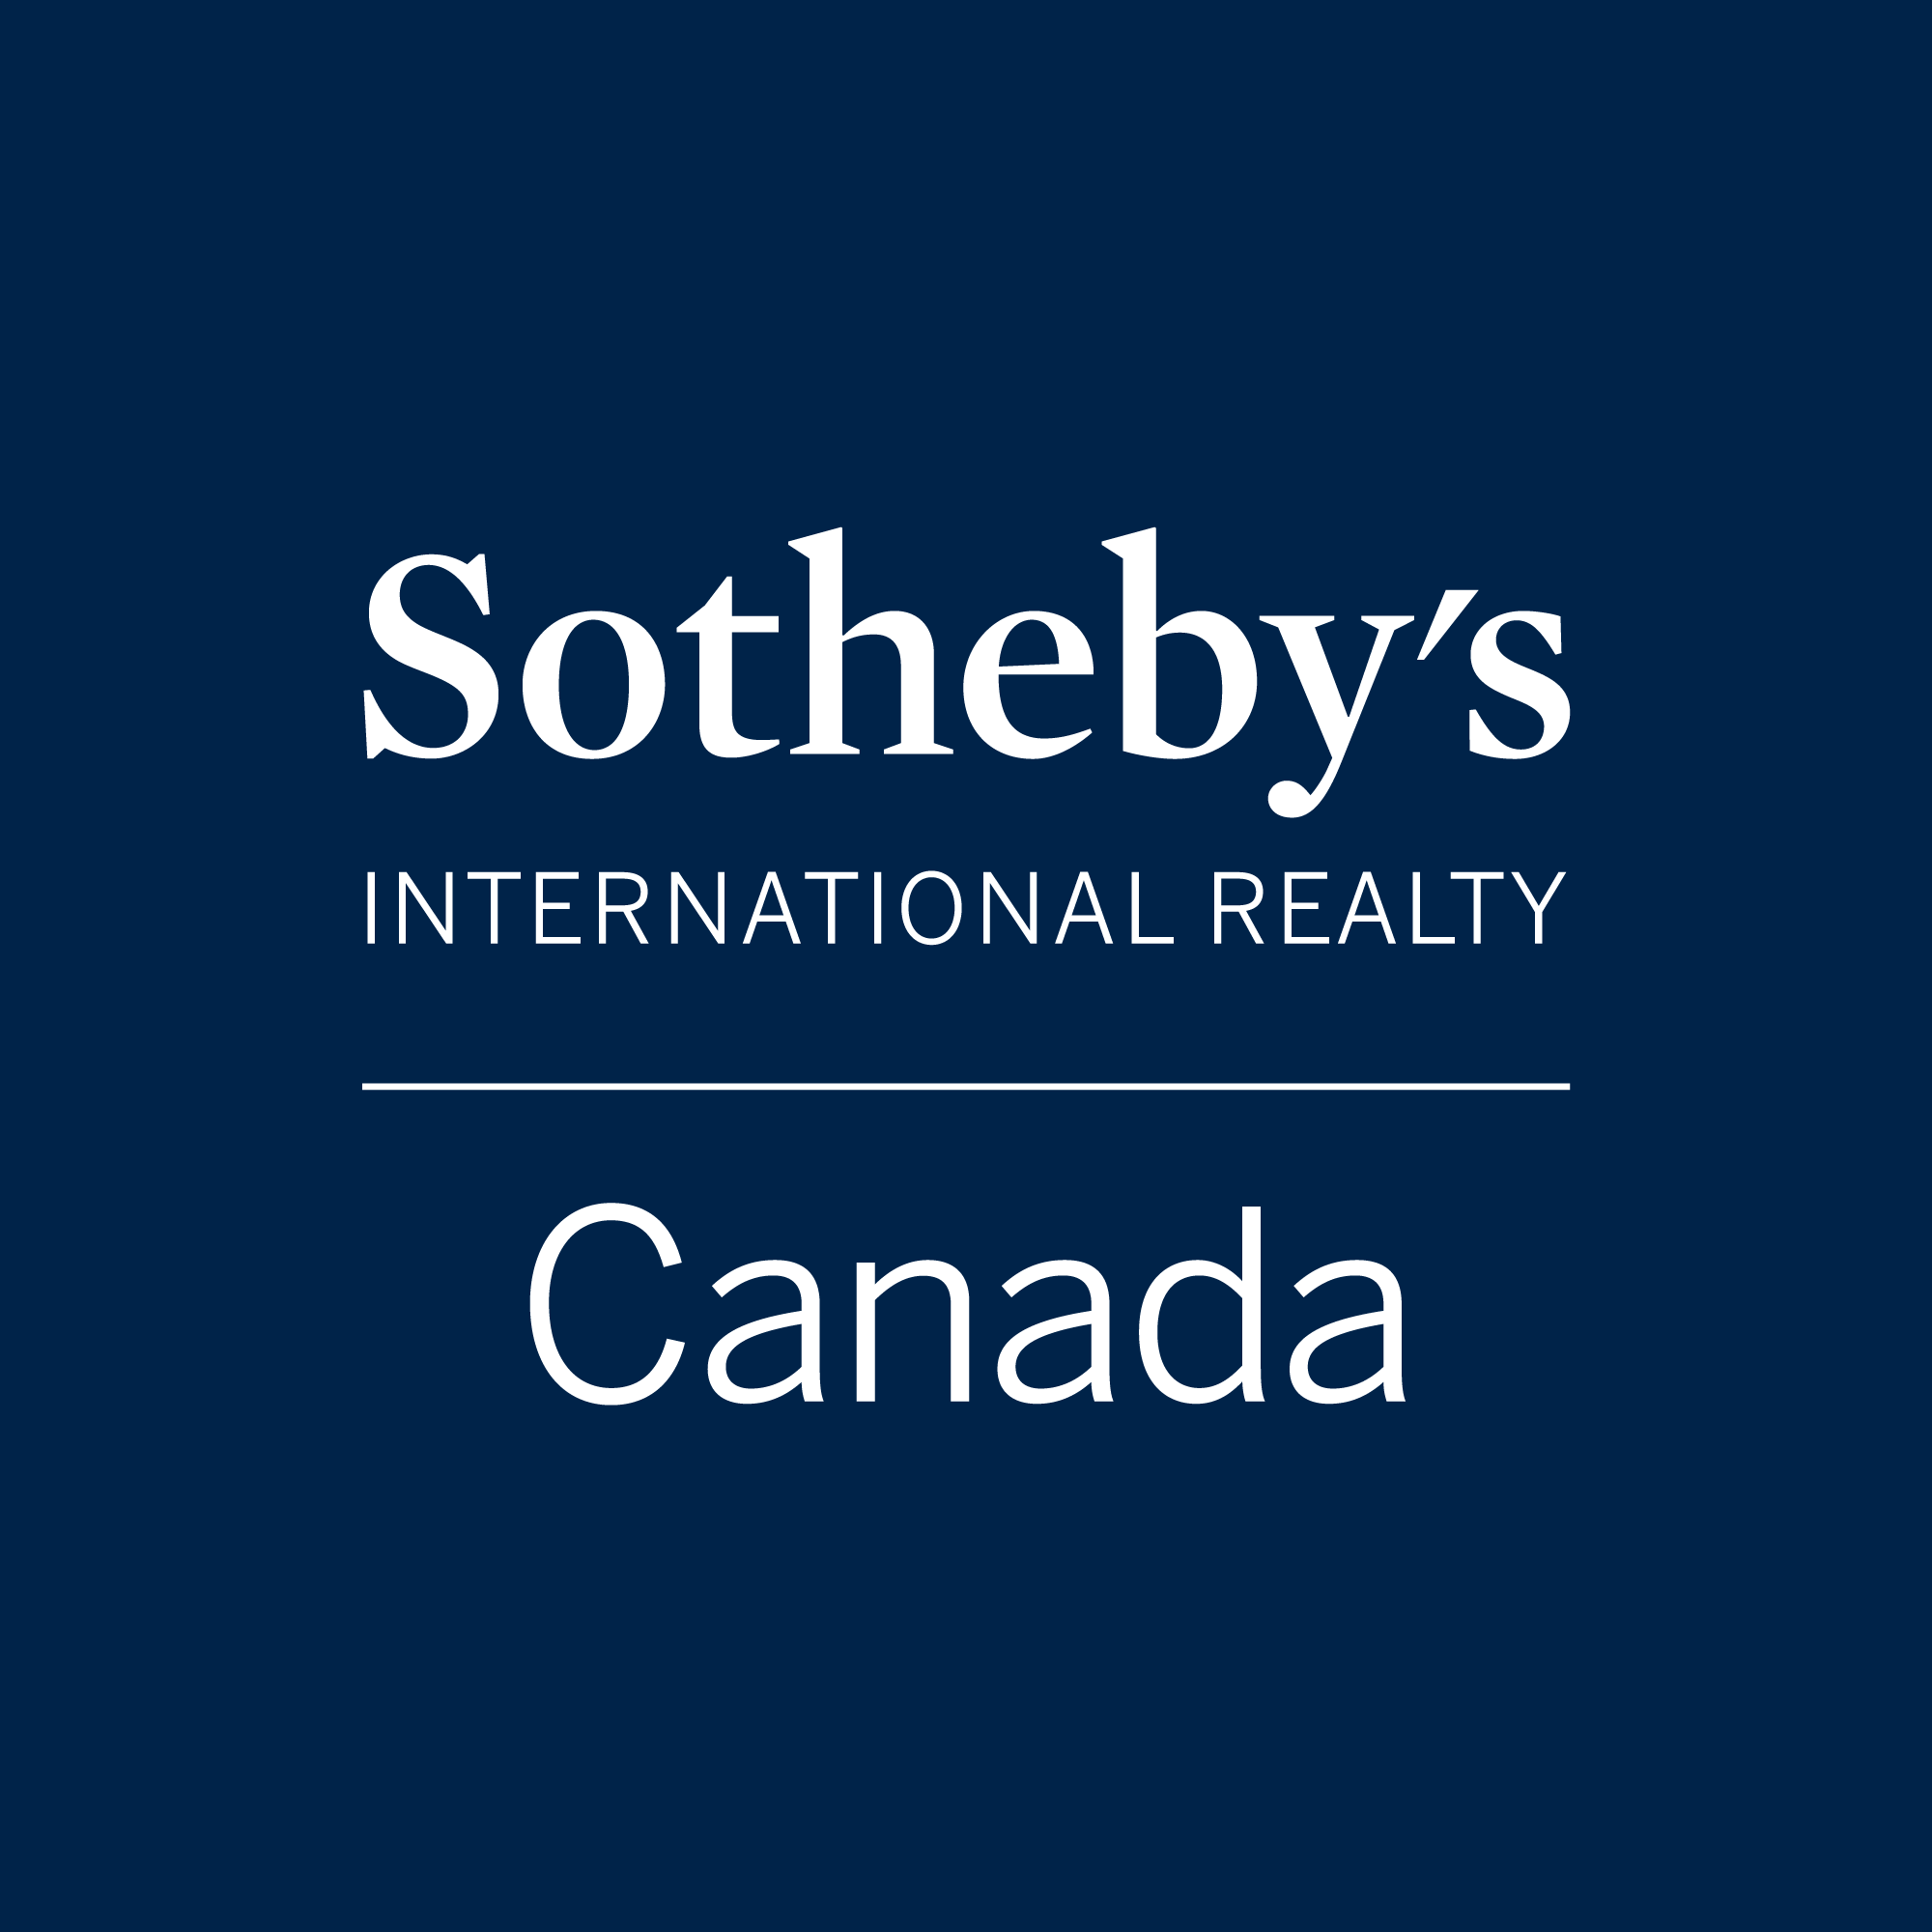 Sotheby's International Realty Canada Whistler